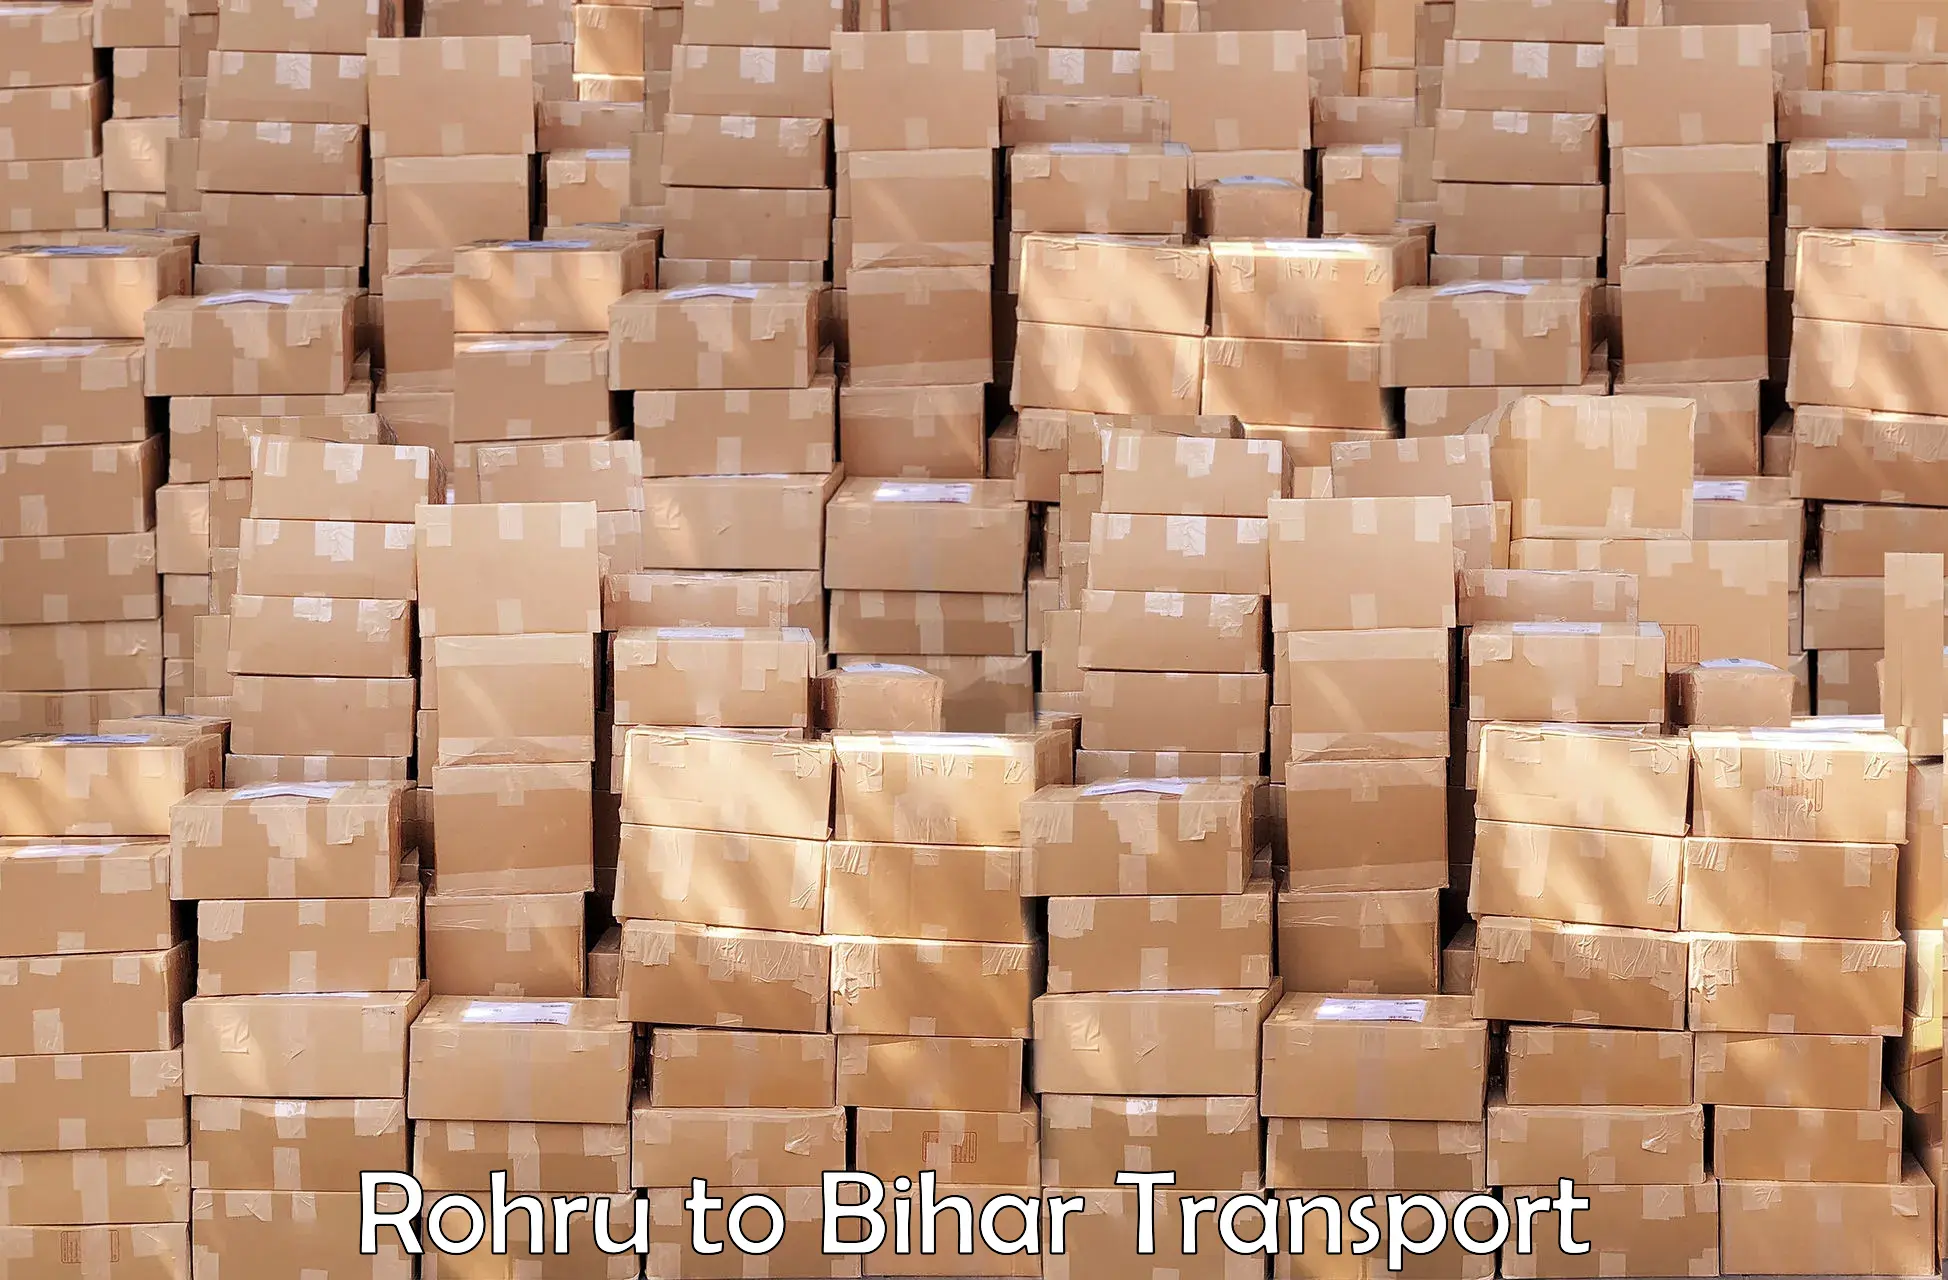 Truck transport companies in India in Rohru to Sharfuddinpur